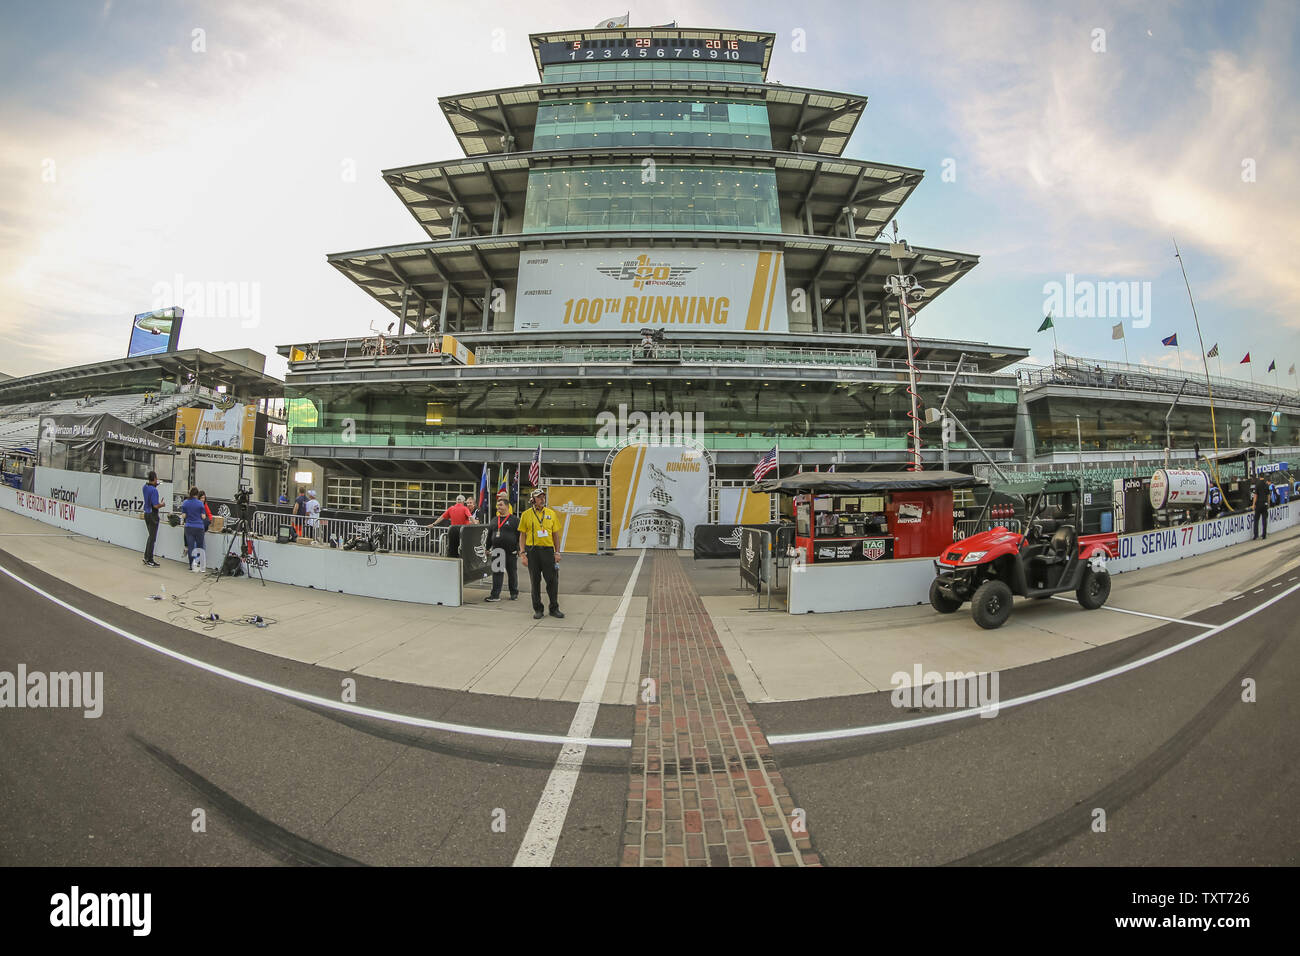 Just after the gates open at 6 am, work continues at the finish line for the 100th running of the Indianapolis 500 at the Indianapolis Motor Speedway on May 29, 2016 in Indianapolis, Indiana.    Photo by Ed Locke/UPI Stock Photo